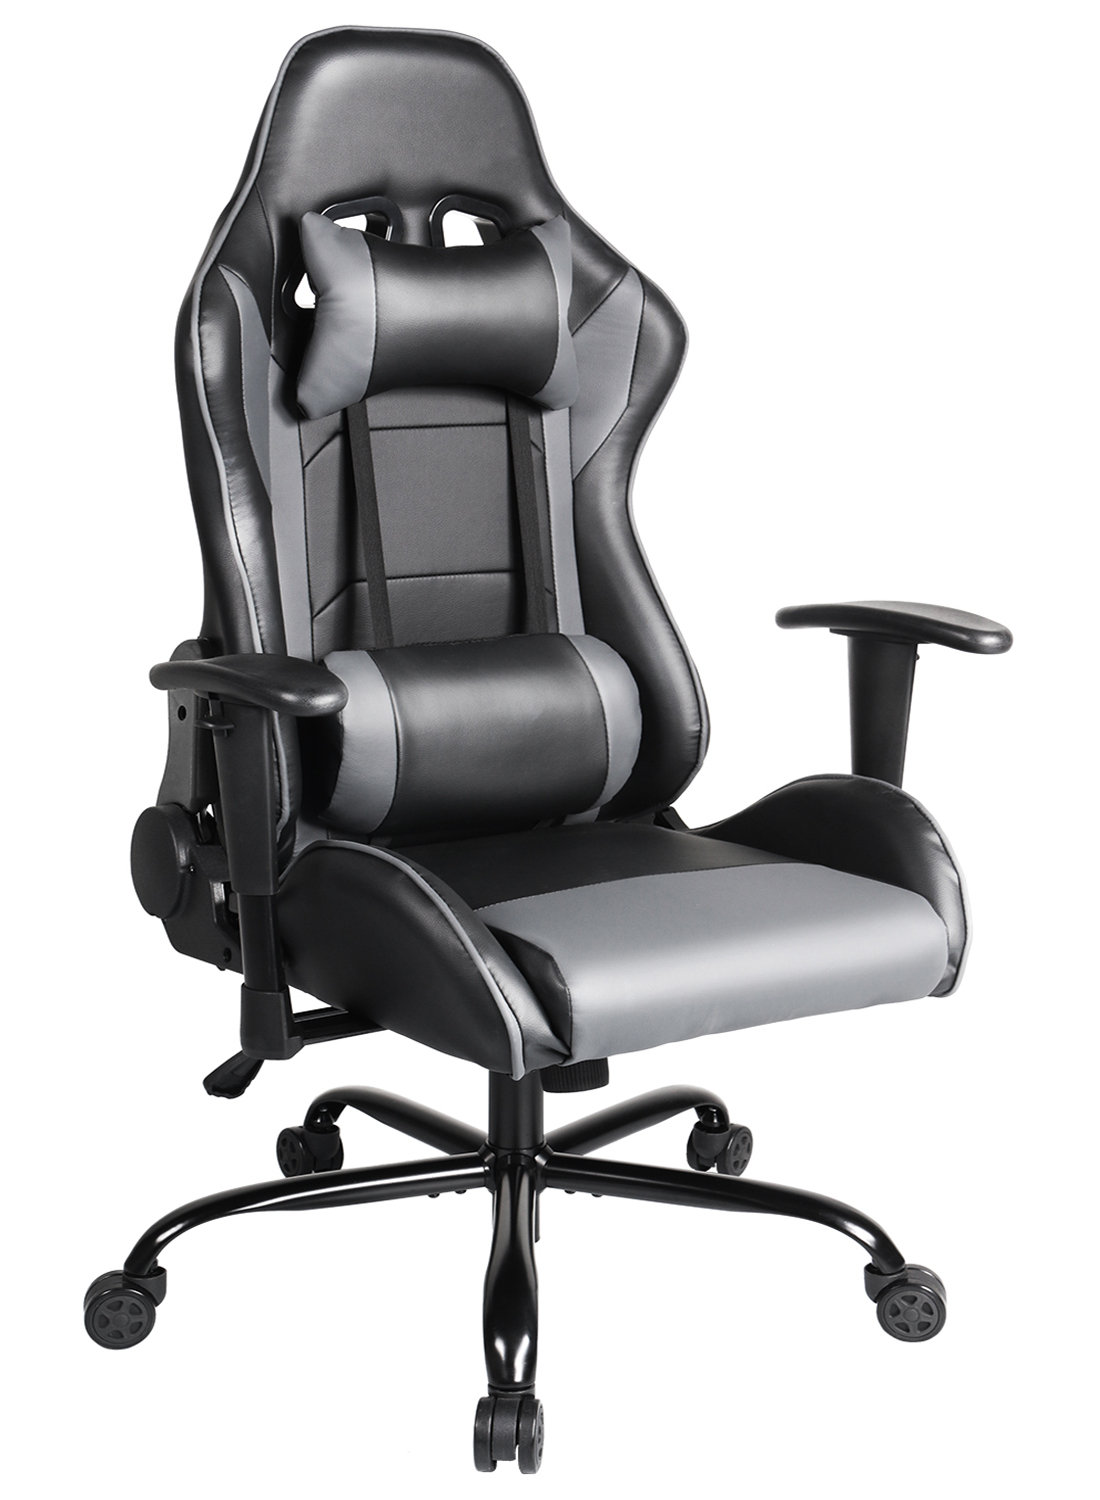 Inbox Zero Gaming Chair Ergonomic Office Chair Computer Desk Chair Reclining Video Game Chair High Back Pu Leather Executive Swivel Chair With Adjustable Armrests And Lumbar Support Grey Wayfair